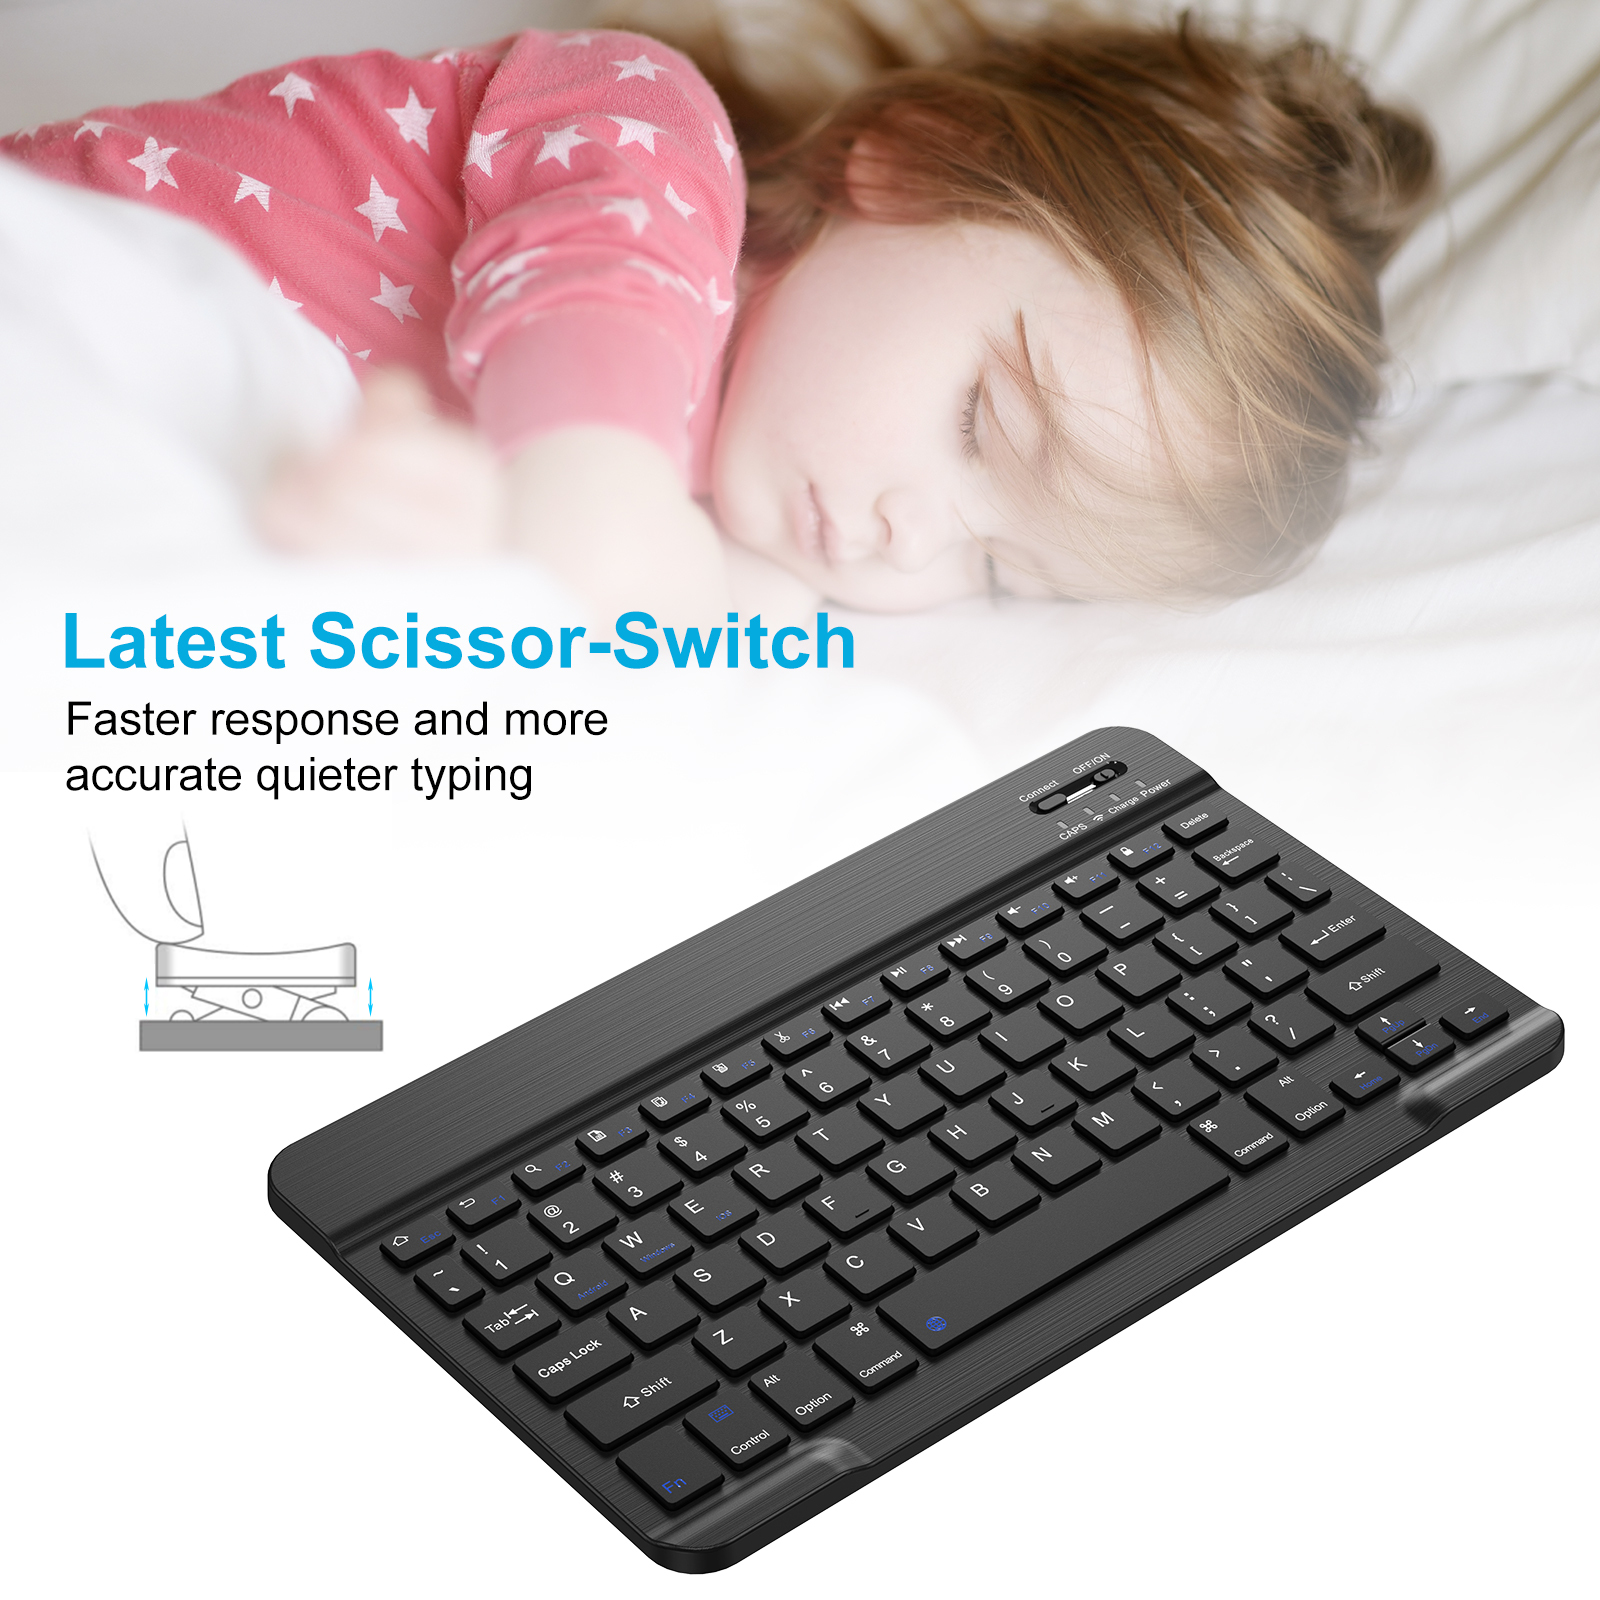 Cimetech Bluetooth Keyboard, Ultra-Slim Wireless Keyboard Quiet Portable Design with Built-in Rechargeable Battery for IOS, Mac, iPad, Windows and Android 3.0 and Above OS Black - image 2 of 8